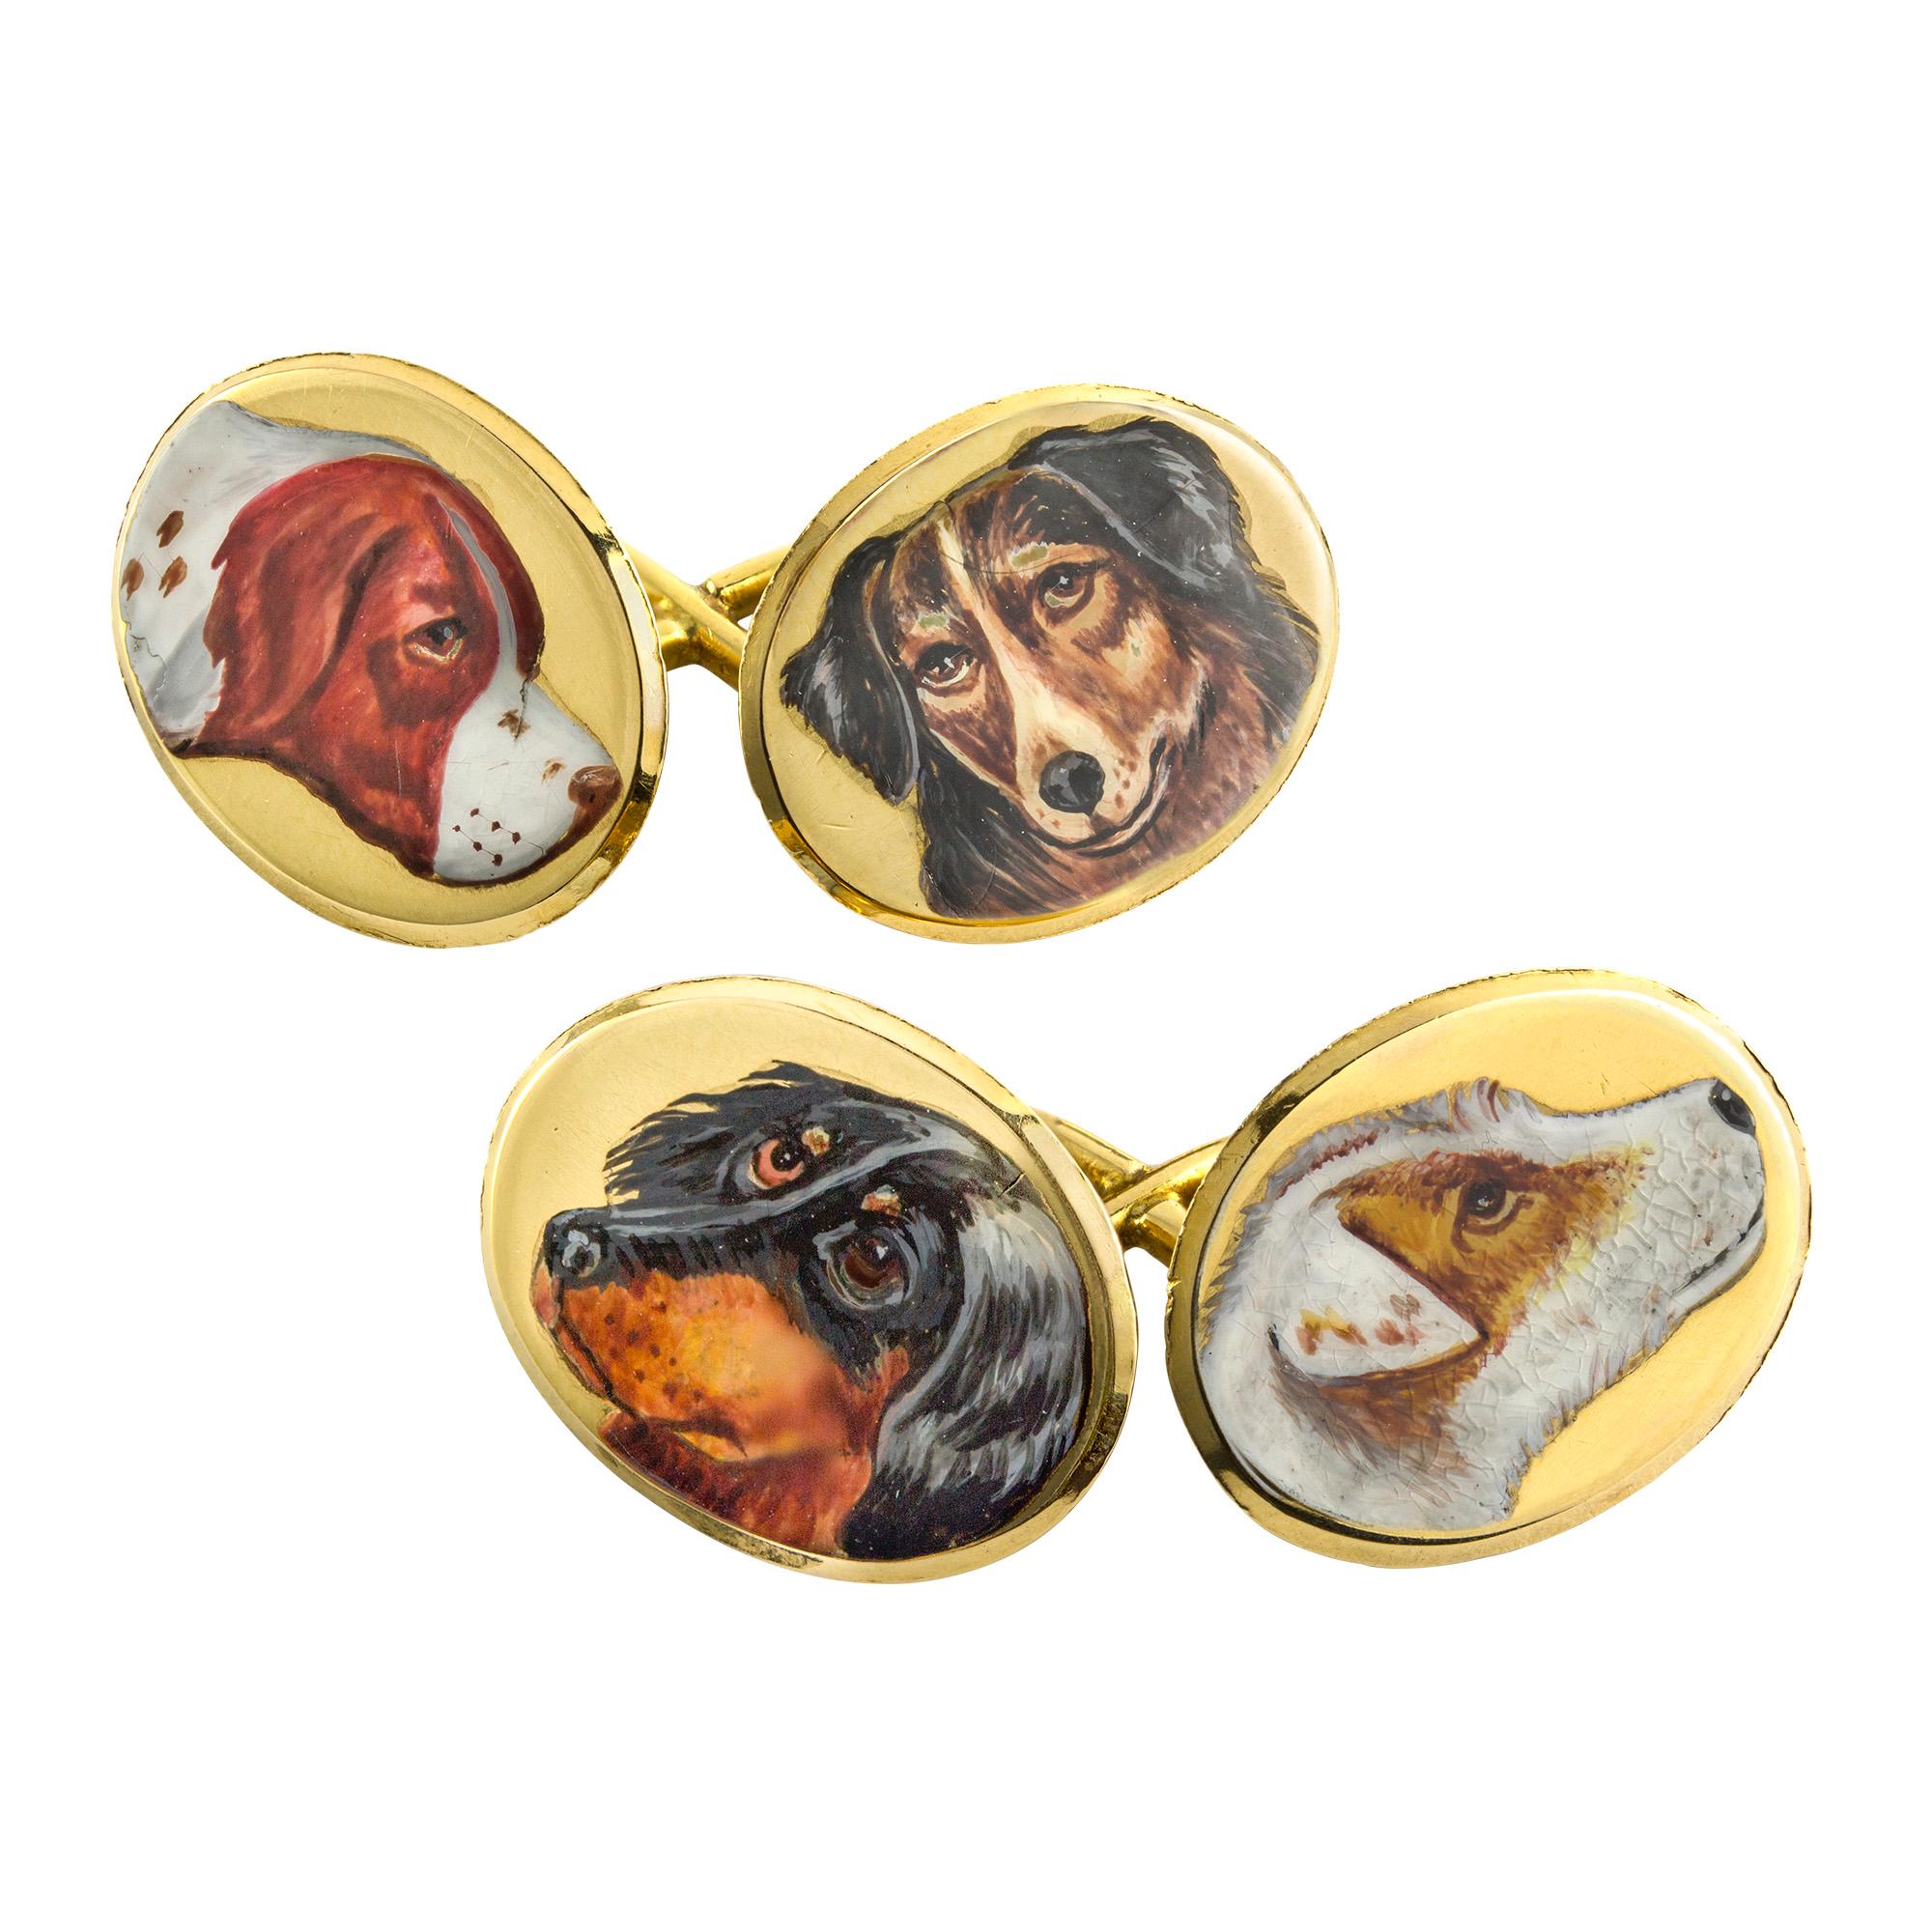 A pair of Victorian 18ct gold cufflinks enamelled with four different dog portraits, the oval links measuring approximately 17 x 13mm, figure of eight link connections, hallmarked Birmingham 1889, signed with maker's monogram JG entwined, gross